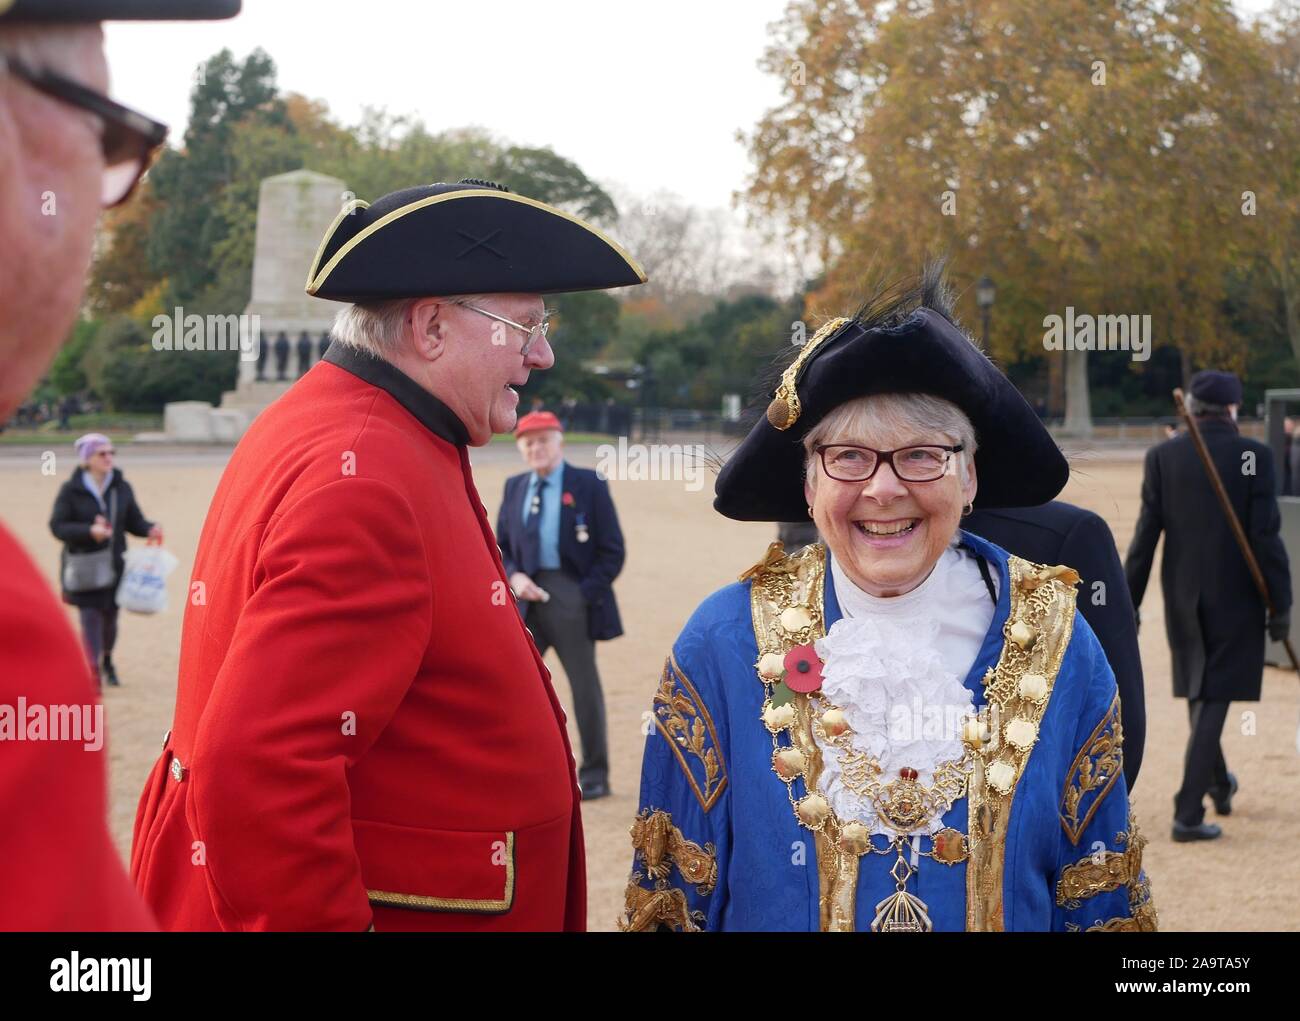 London, UK. 17th Nov, 2019. Sir Malcolm Rifkind, The Chief Rabbi Ephraim Mirvis and The Right Worshipful Lord Mayor of Westminster - Councillor Ruth Bush, attend the annual AJEX (The Association of Jewish Ex-Servicemen and Women) Remembrance Ceremony & Parade in Whitehall, London. Credit: Brian Minkoff/Alamy Live News Stock Photo